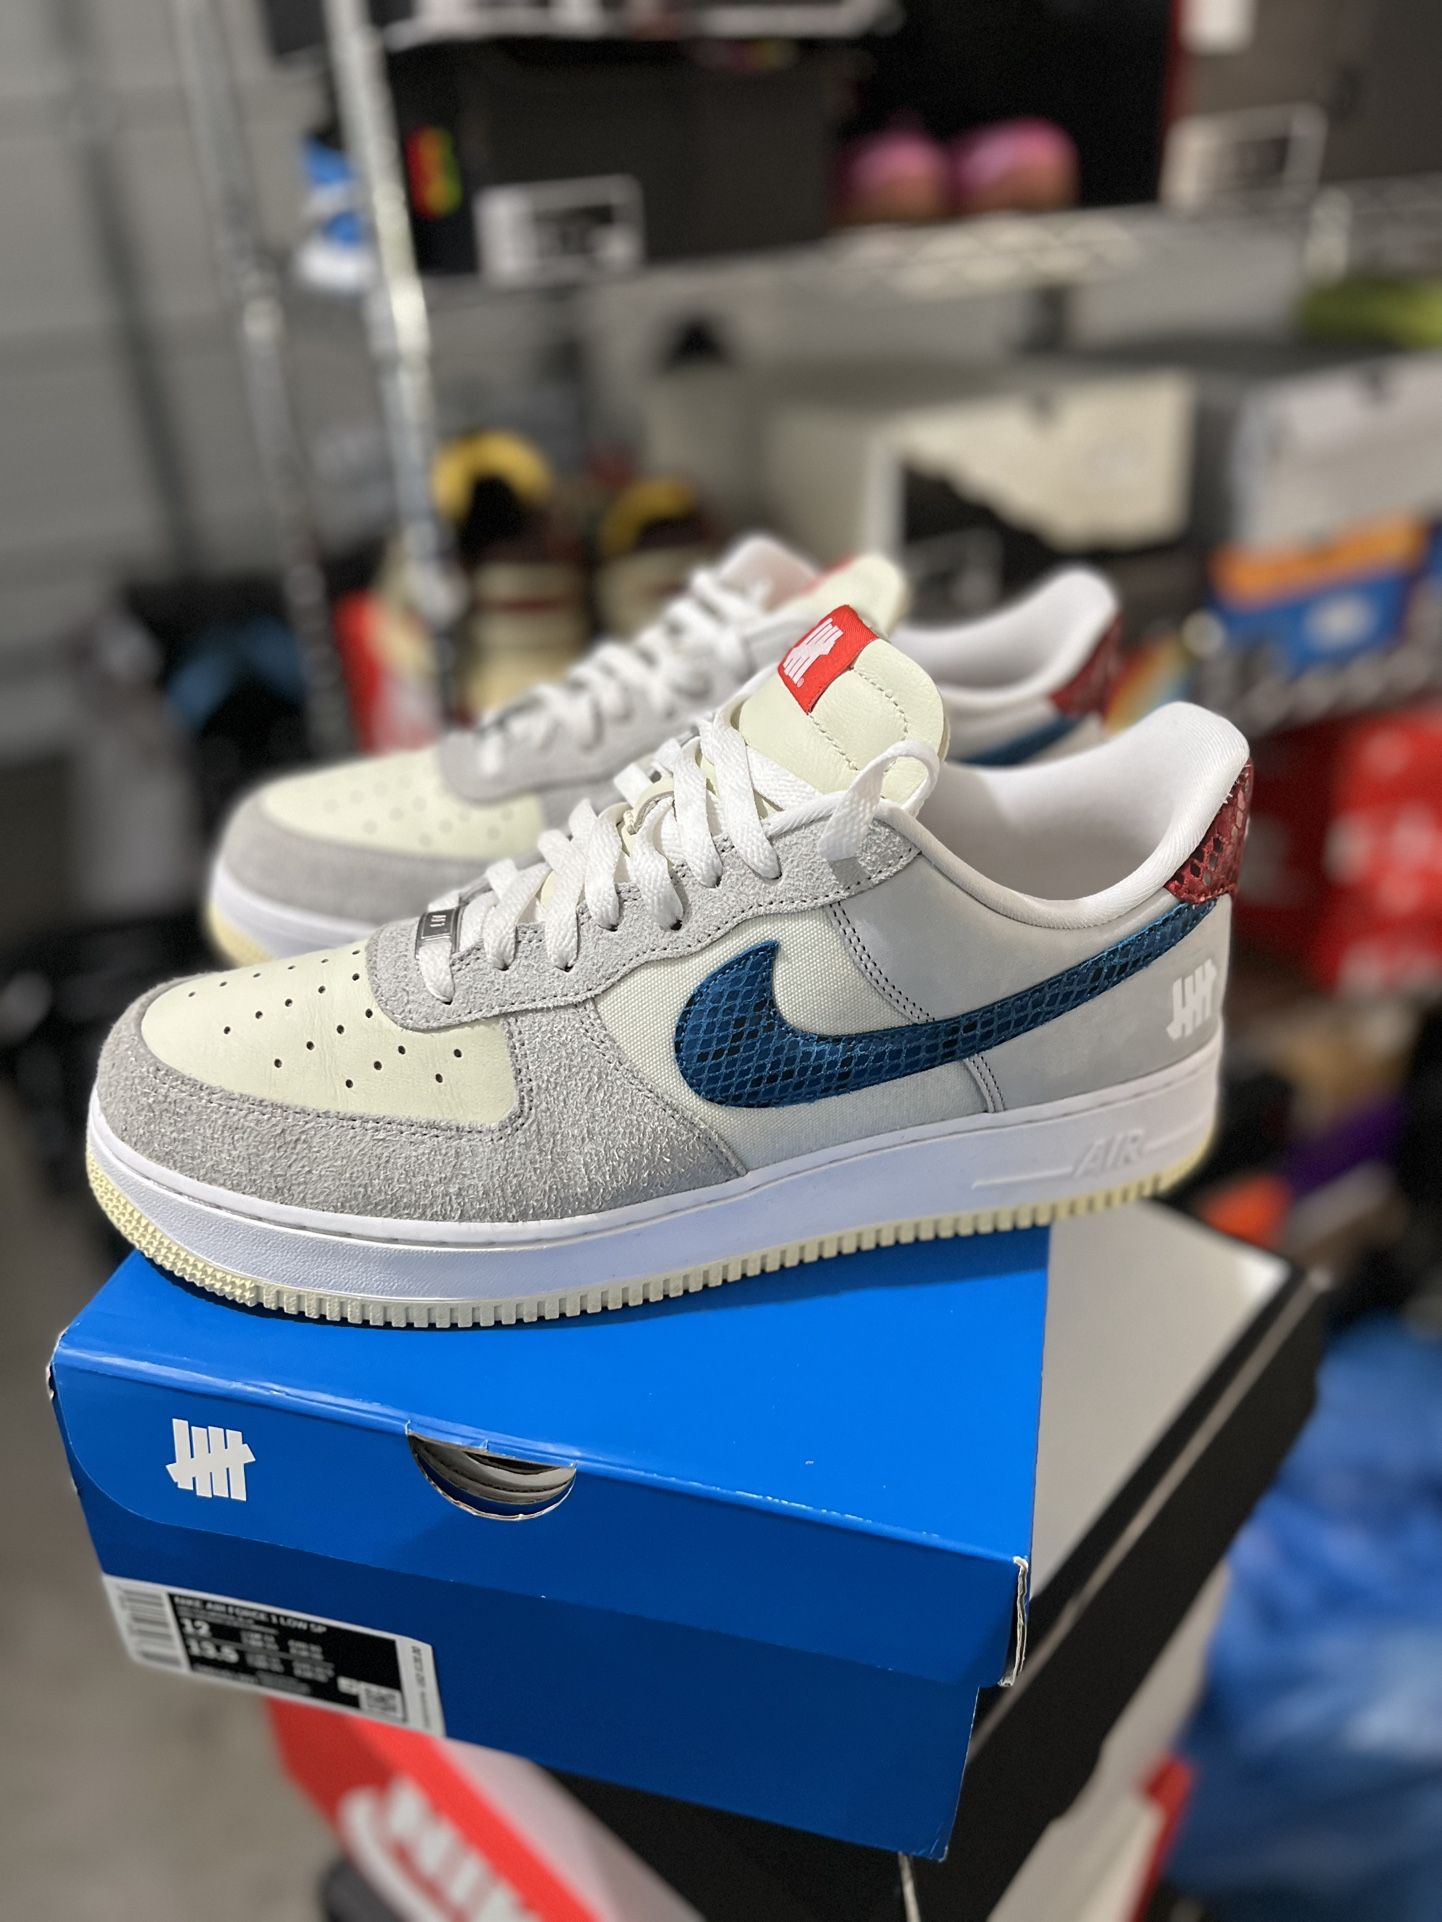 Nike Air Force 1 Forest Green for Sale in Anaheim, CA - OfferUp